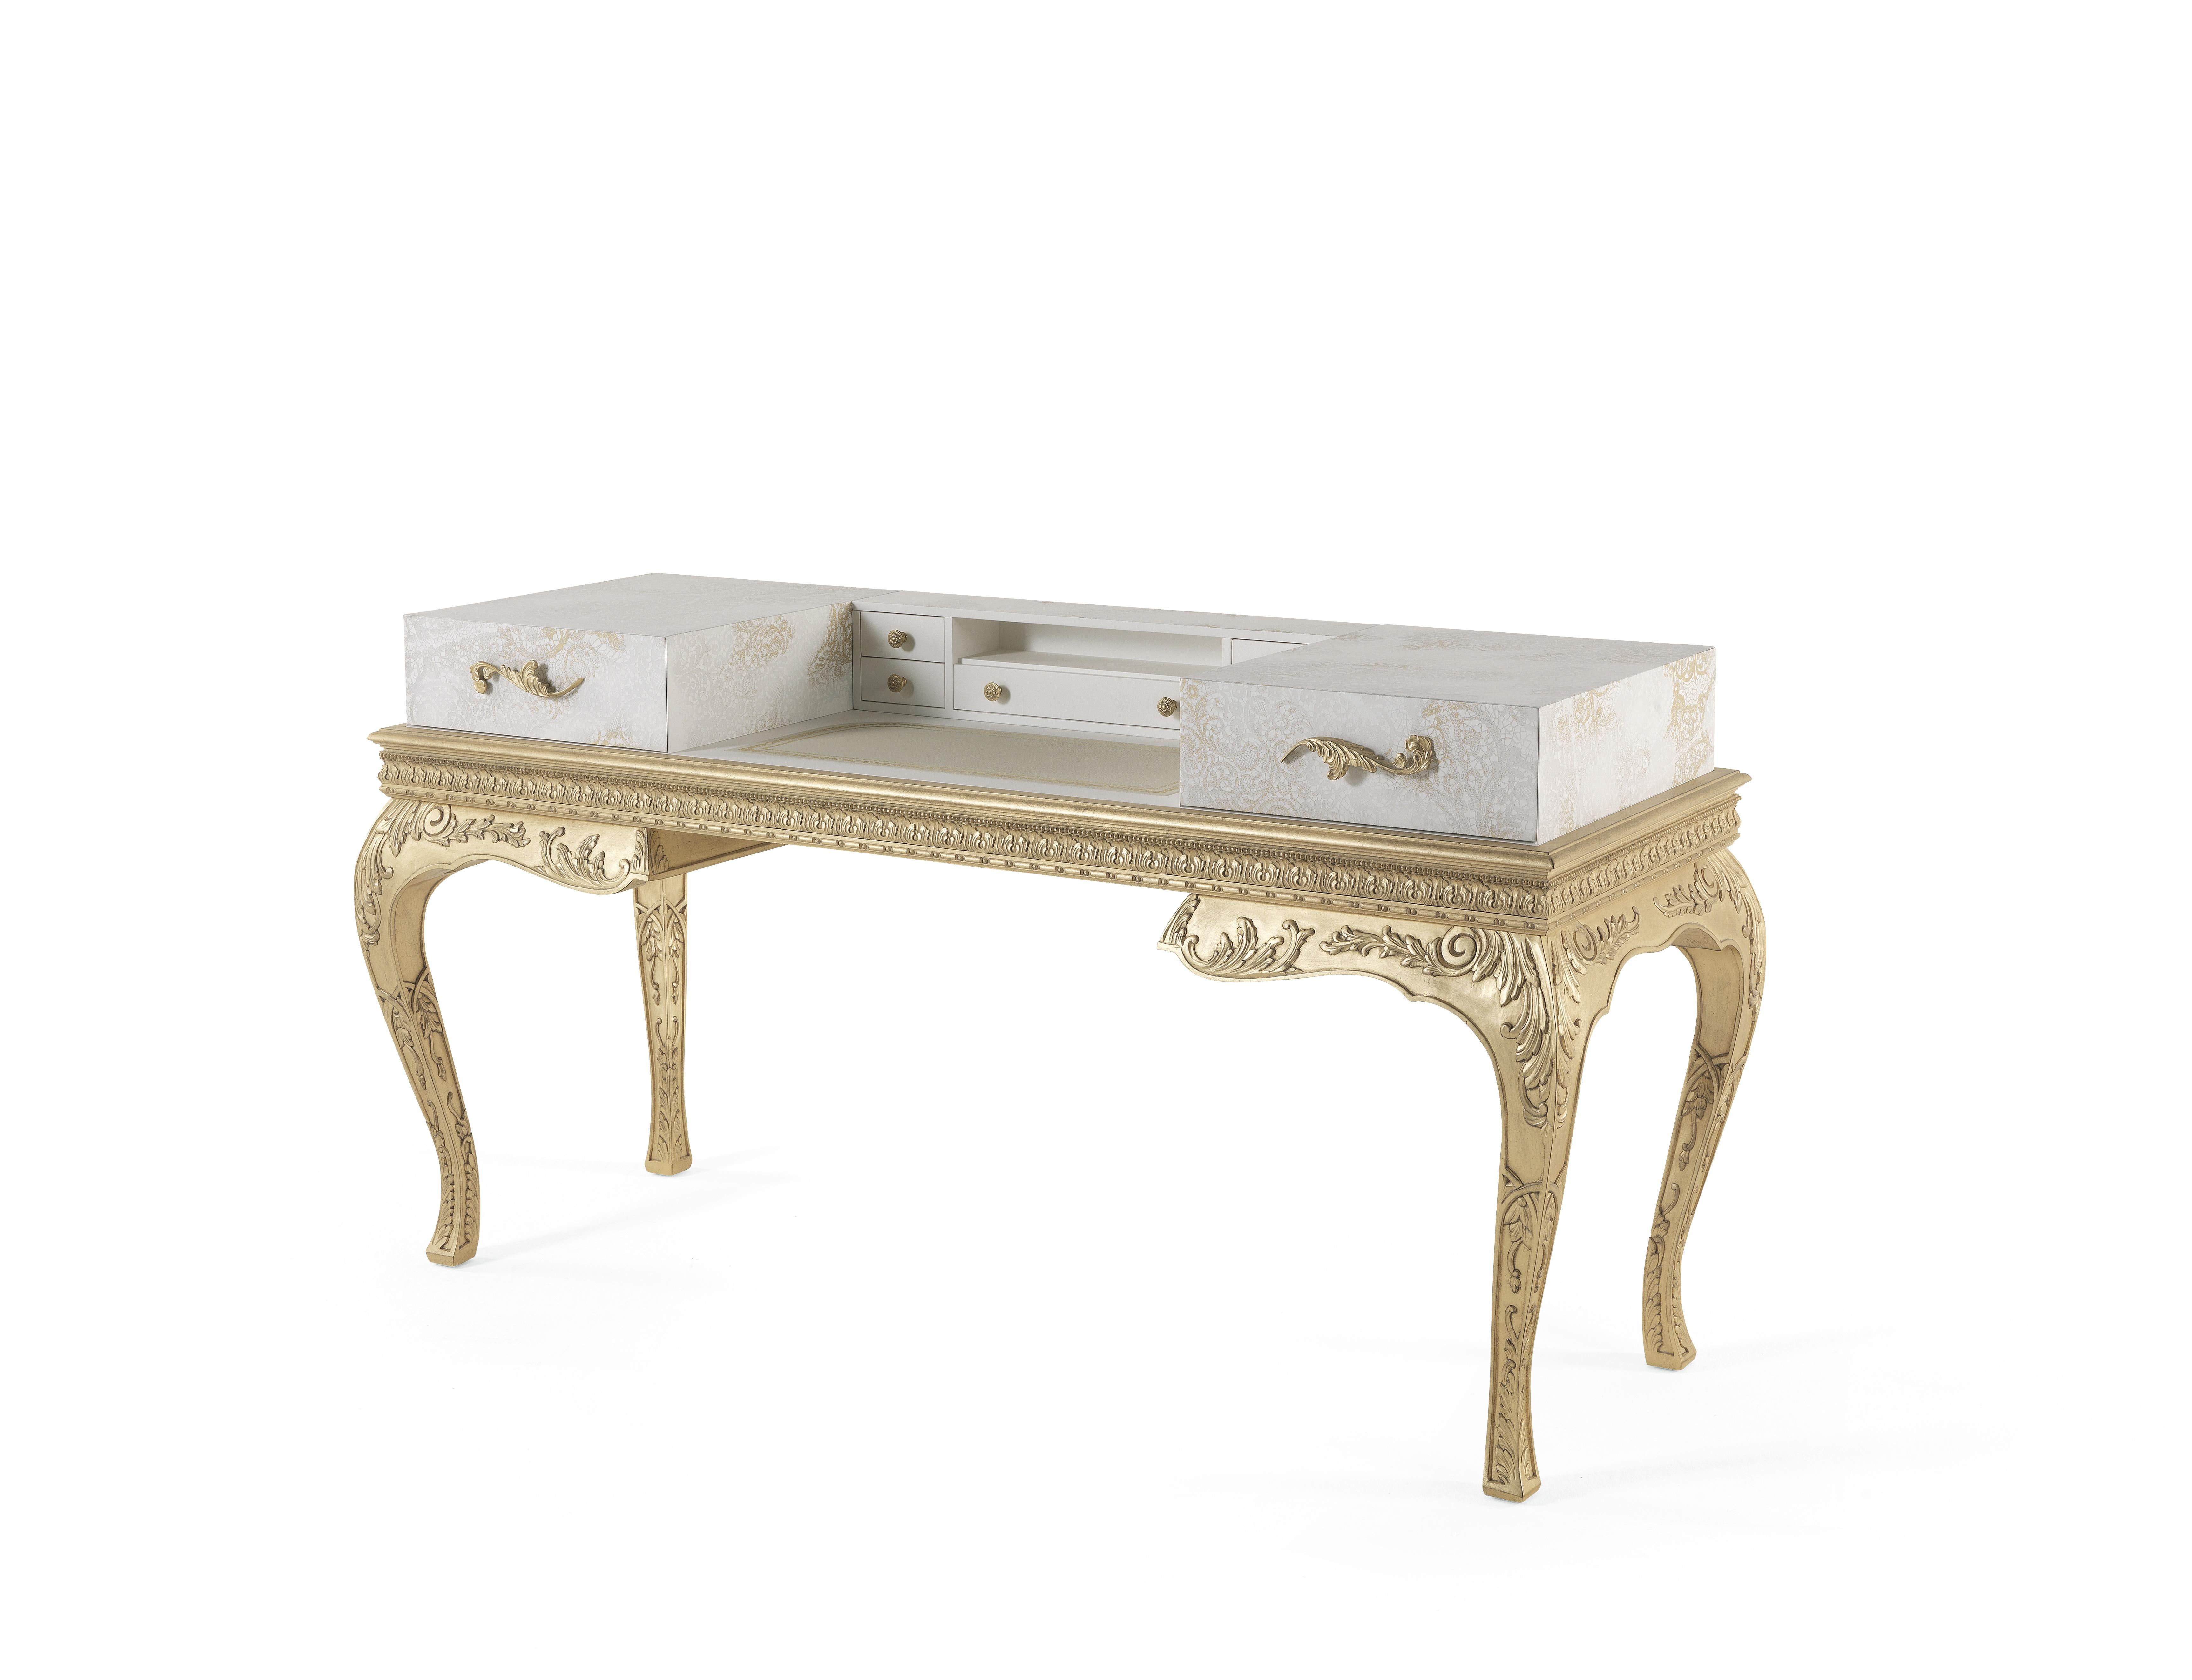 The pieces of the Brocart line showcase a refined style that evokes the luxury of the 17th and 18th century French noble courts. They present a base with hand-carved legs and antique gold-leaf finishes in pure classic style, combined with an upper